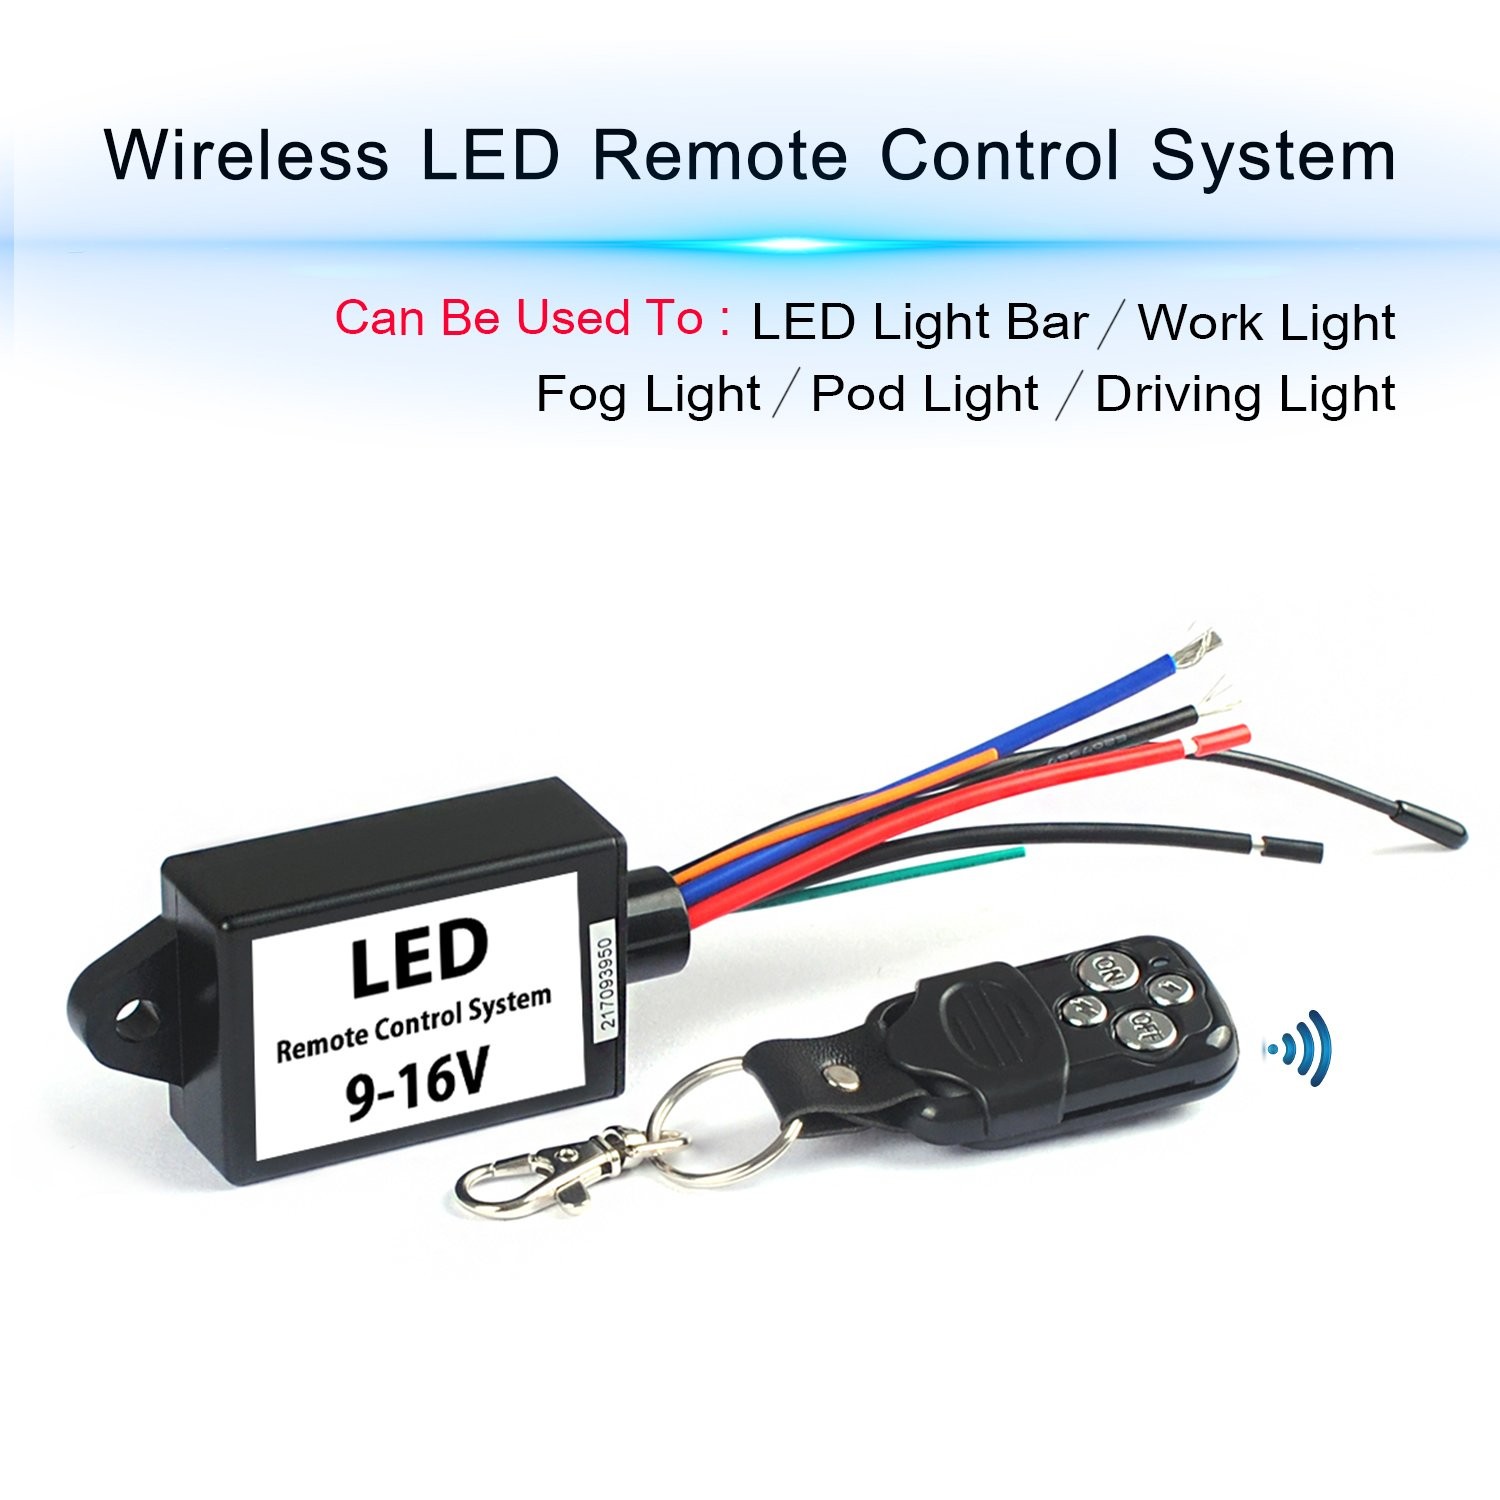 LED Light Bar Remote Wiring Harness Wireless Remote Wiring Harness for LED Light Bar Driving Light Fog Light Pods Light Work Light Supported Current is 30A